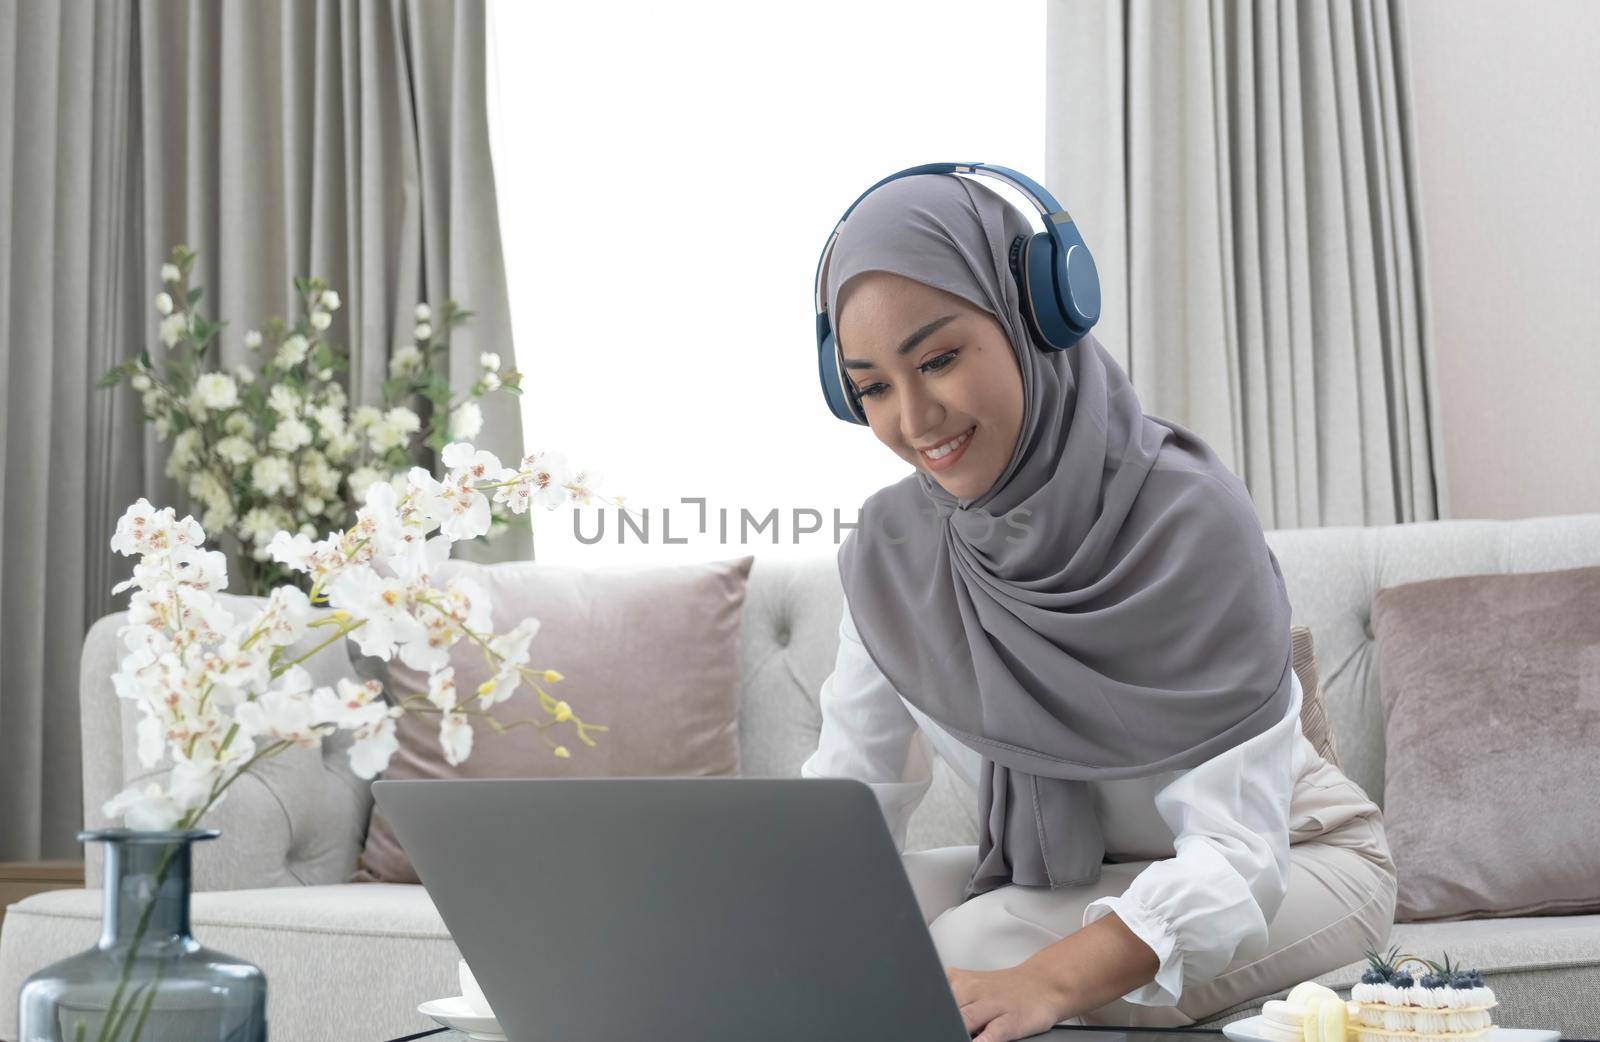 Online Tutoring. Young muslim woman teacher having video call with students, talking at laptop camera, sitting on couch at home.